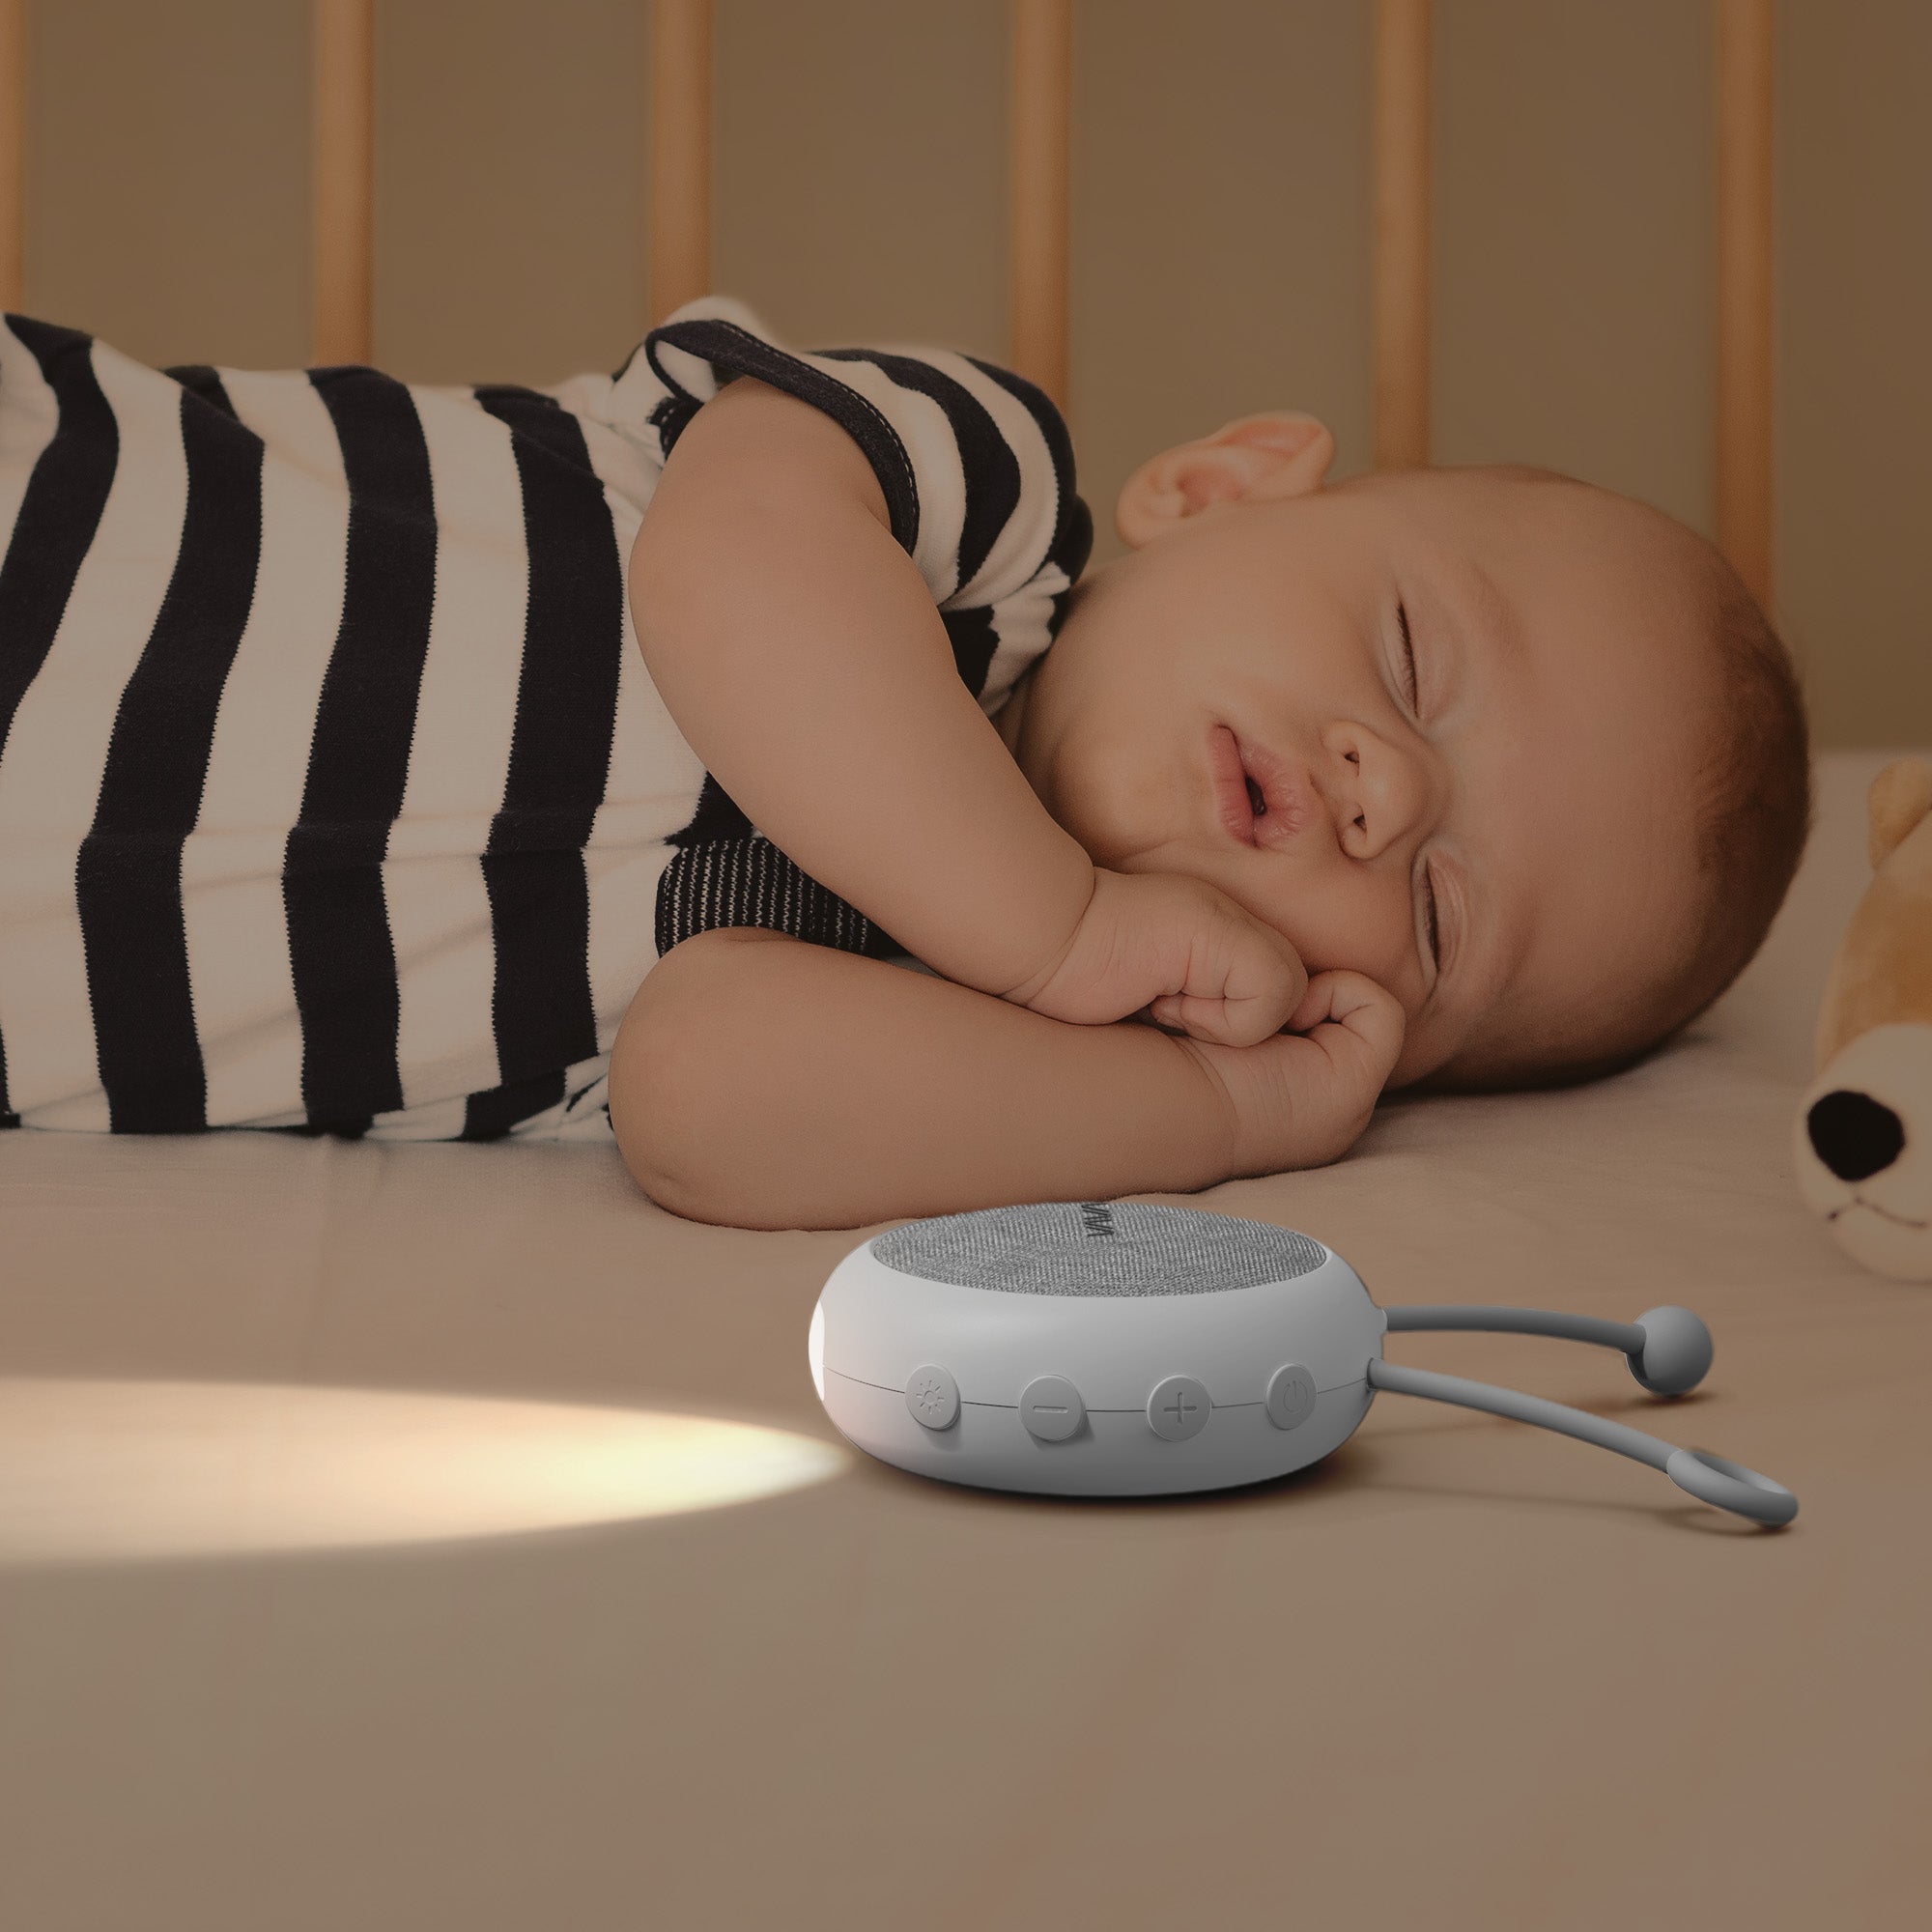 VAVA Twinkle Soother sound machine with baby sleeping on the bed